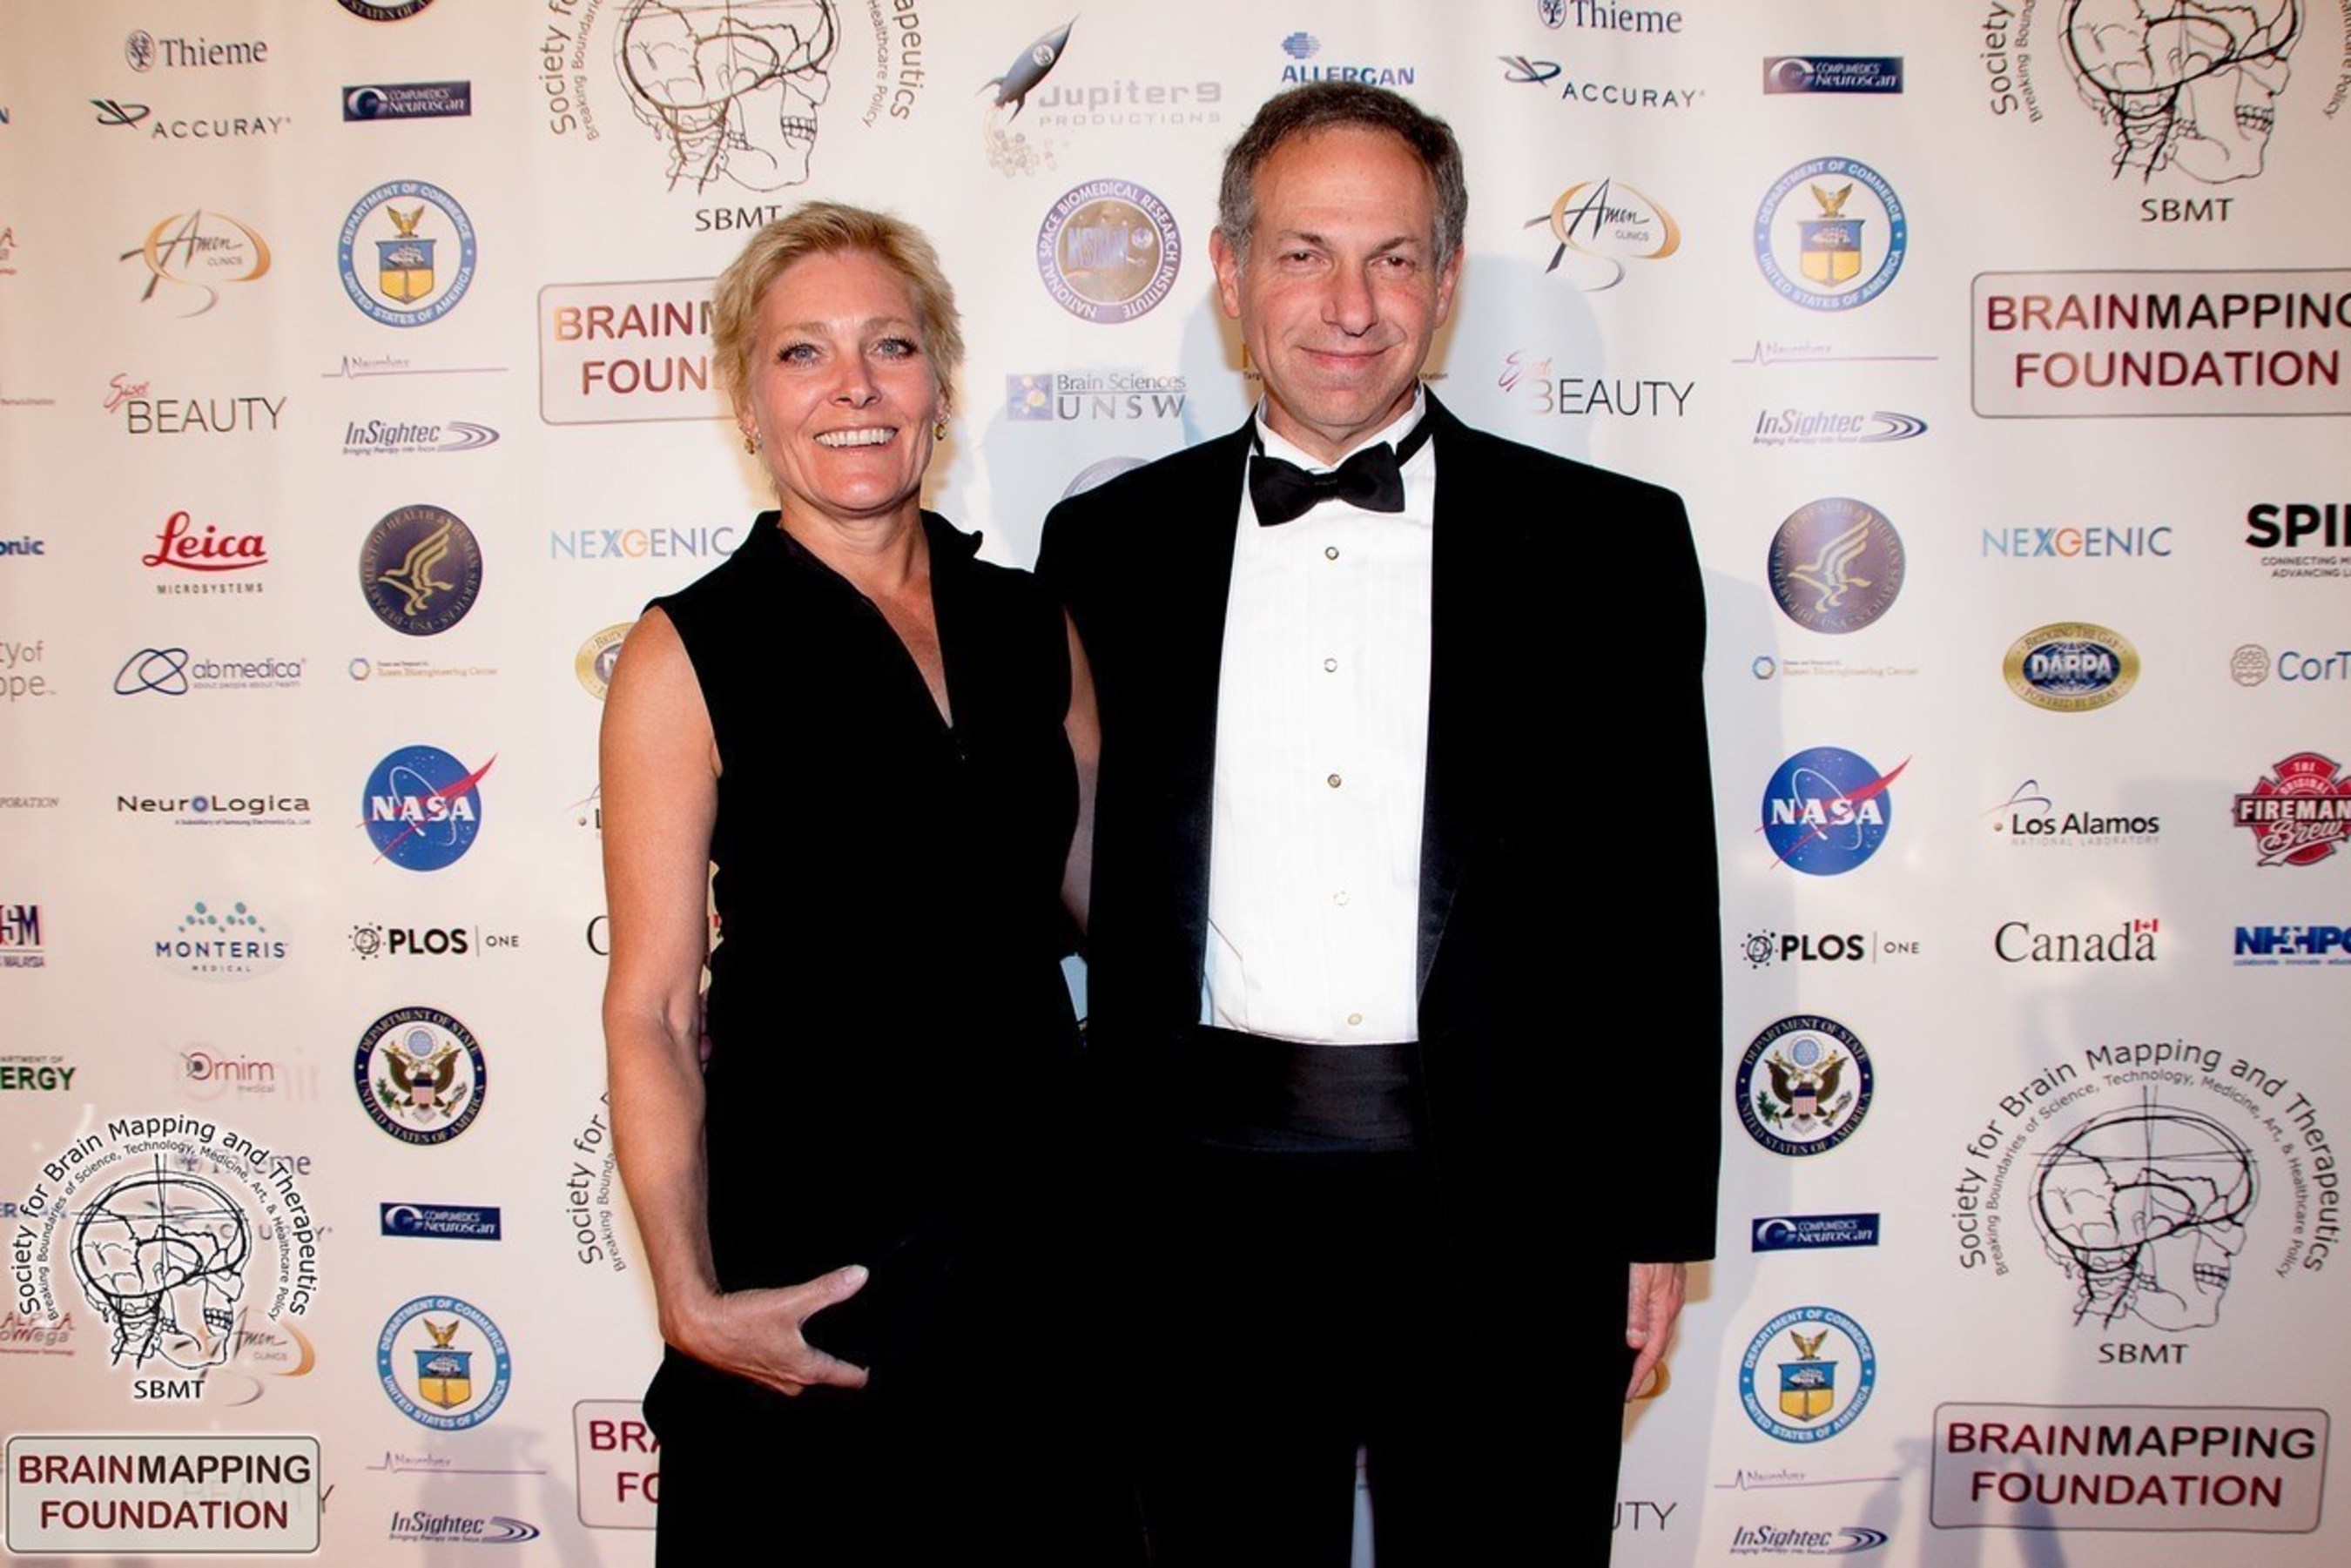 Former Lt. Colonel US Army Reserve, Aaron G. Filler, MD, PhD, FRCS, JD and his wife former Captain, US Air Force, Annelise Shaw. Dr Filler - awardee of the Pioneer in Medicine Award of the Society for Brain Mapping & Therapeutics (SBMT), is currently President and Counsel for SBMT. He is the lead inventor of Diffusion Tensor Imaging (DTI) the method that visualizes human brain tracts to detect brain injury in impact sports, accidents, and in war fighters in the field.